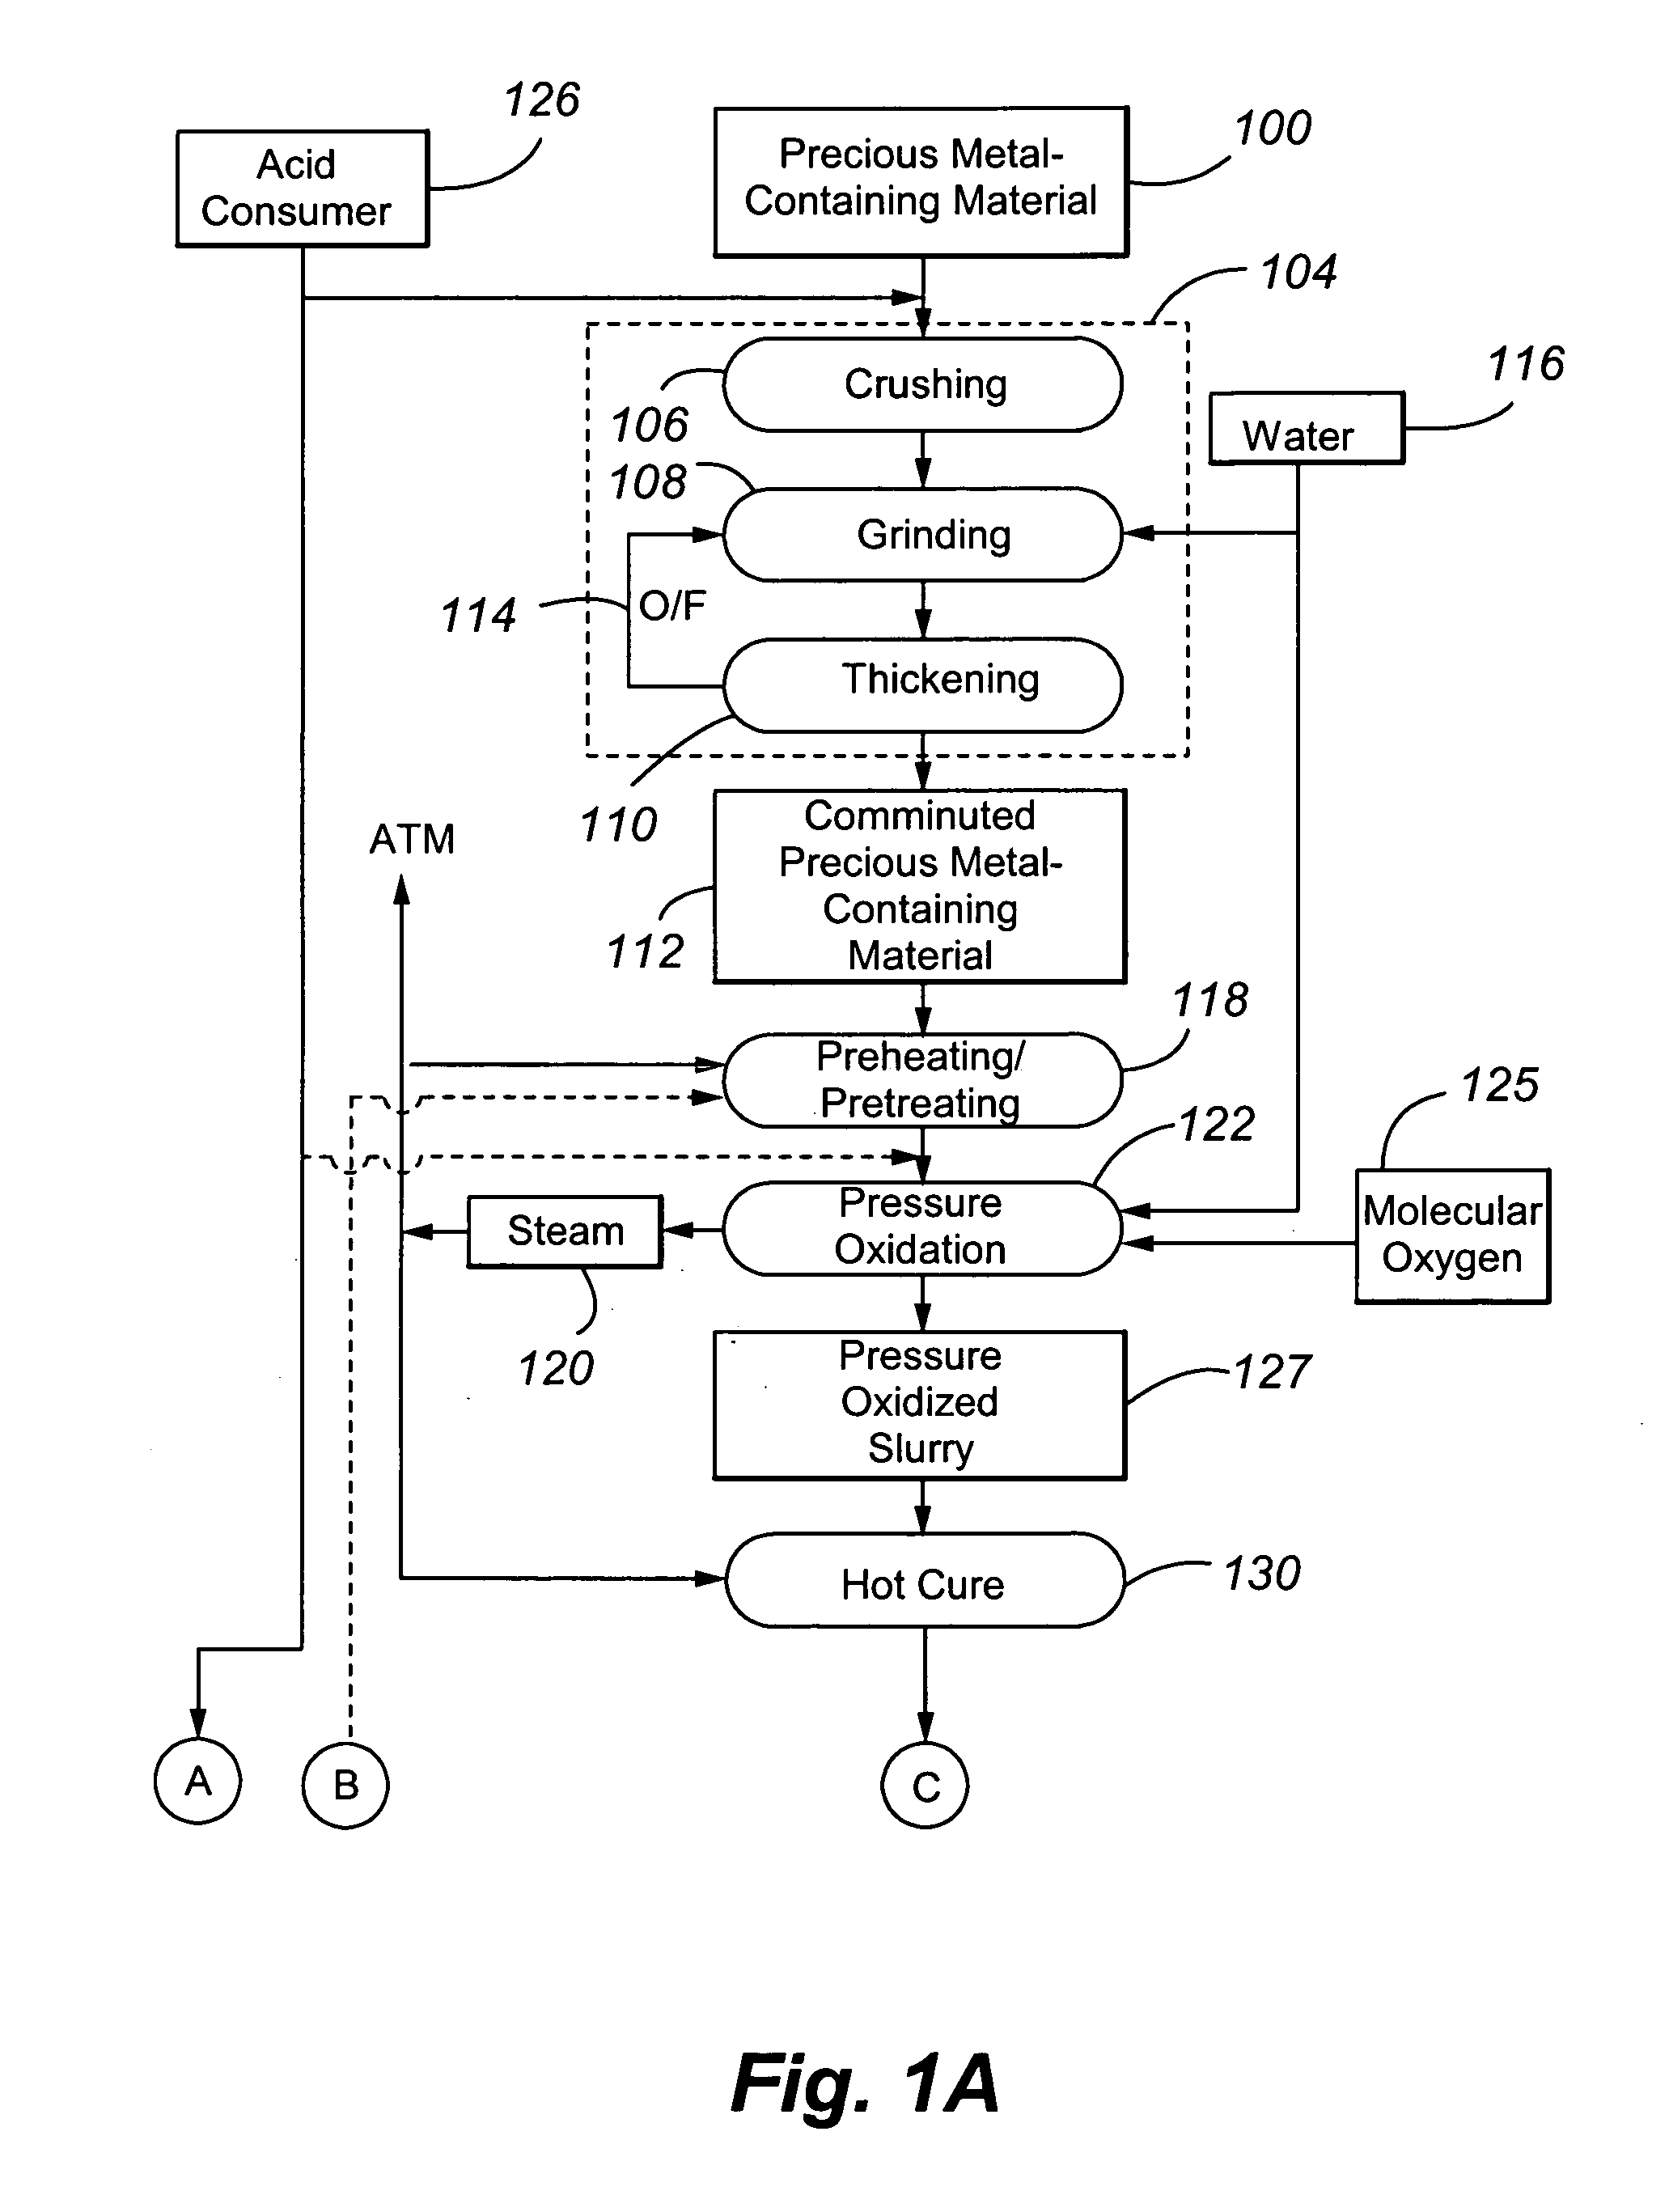 Reduction of lime consumption when treating refractory gold ores or concentrates